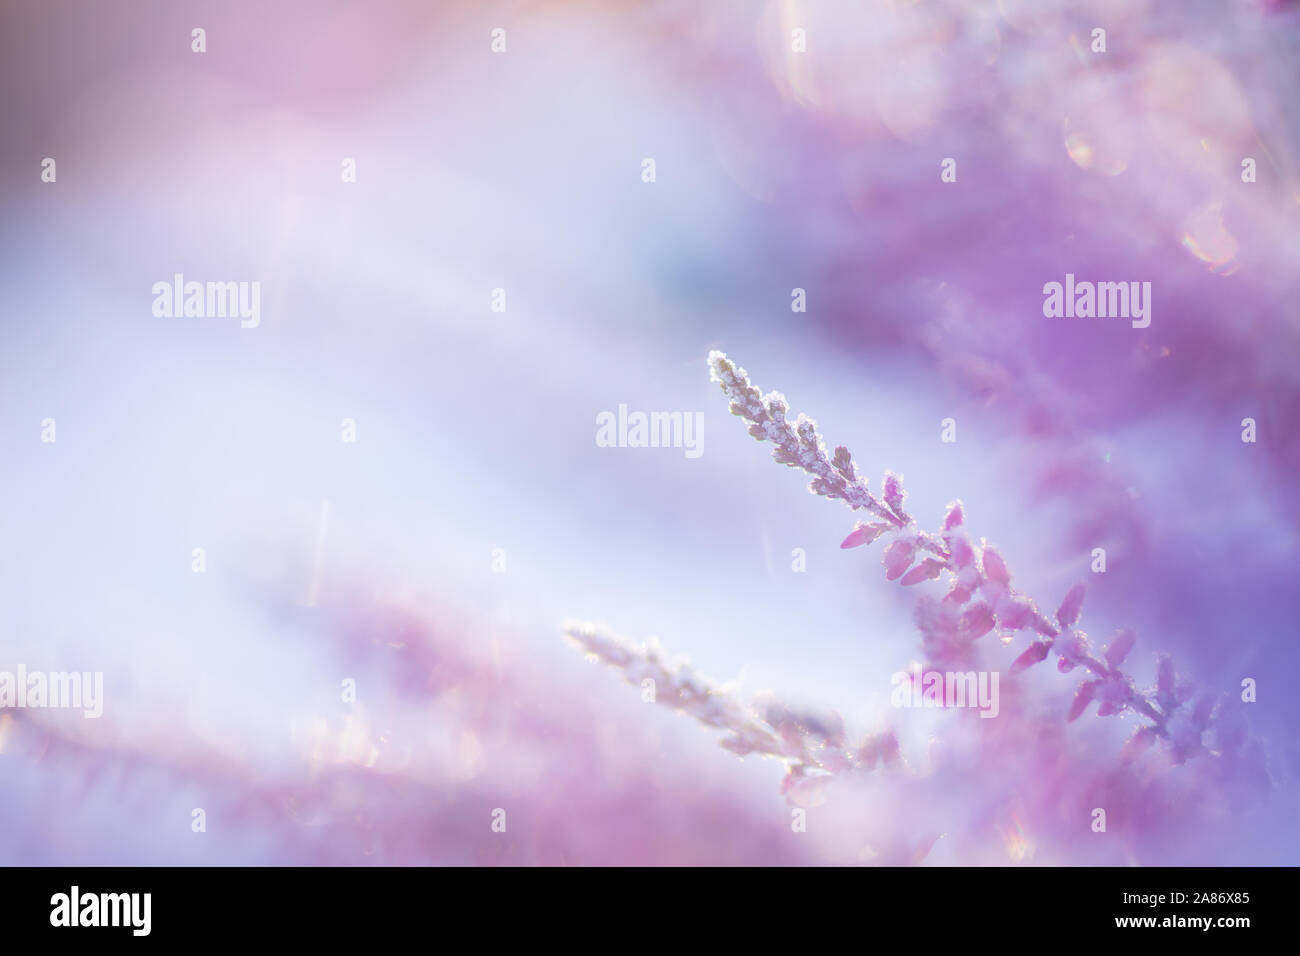 Common heather, Calluna vulgaris, flowers covered with ice crystals Stock Photo